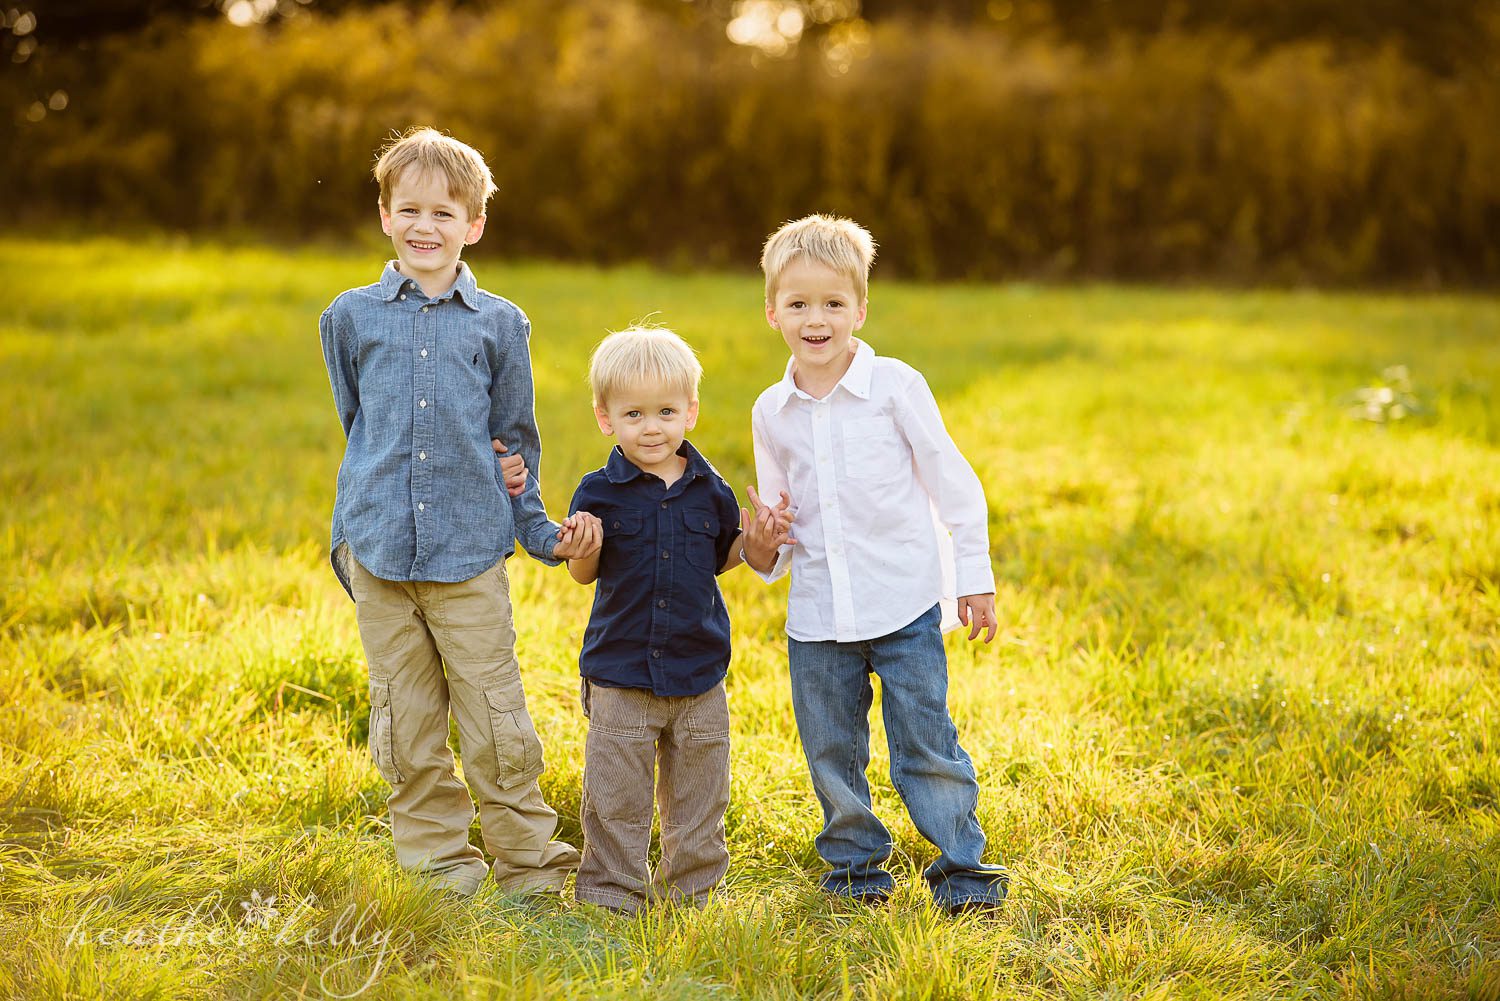 three brothers holding hands. ct family photography. now booking spring 2017 family sessions in ct.